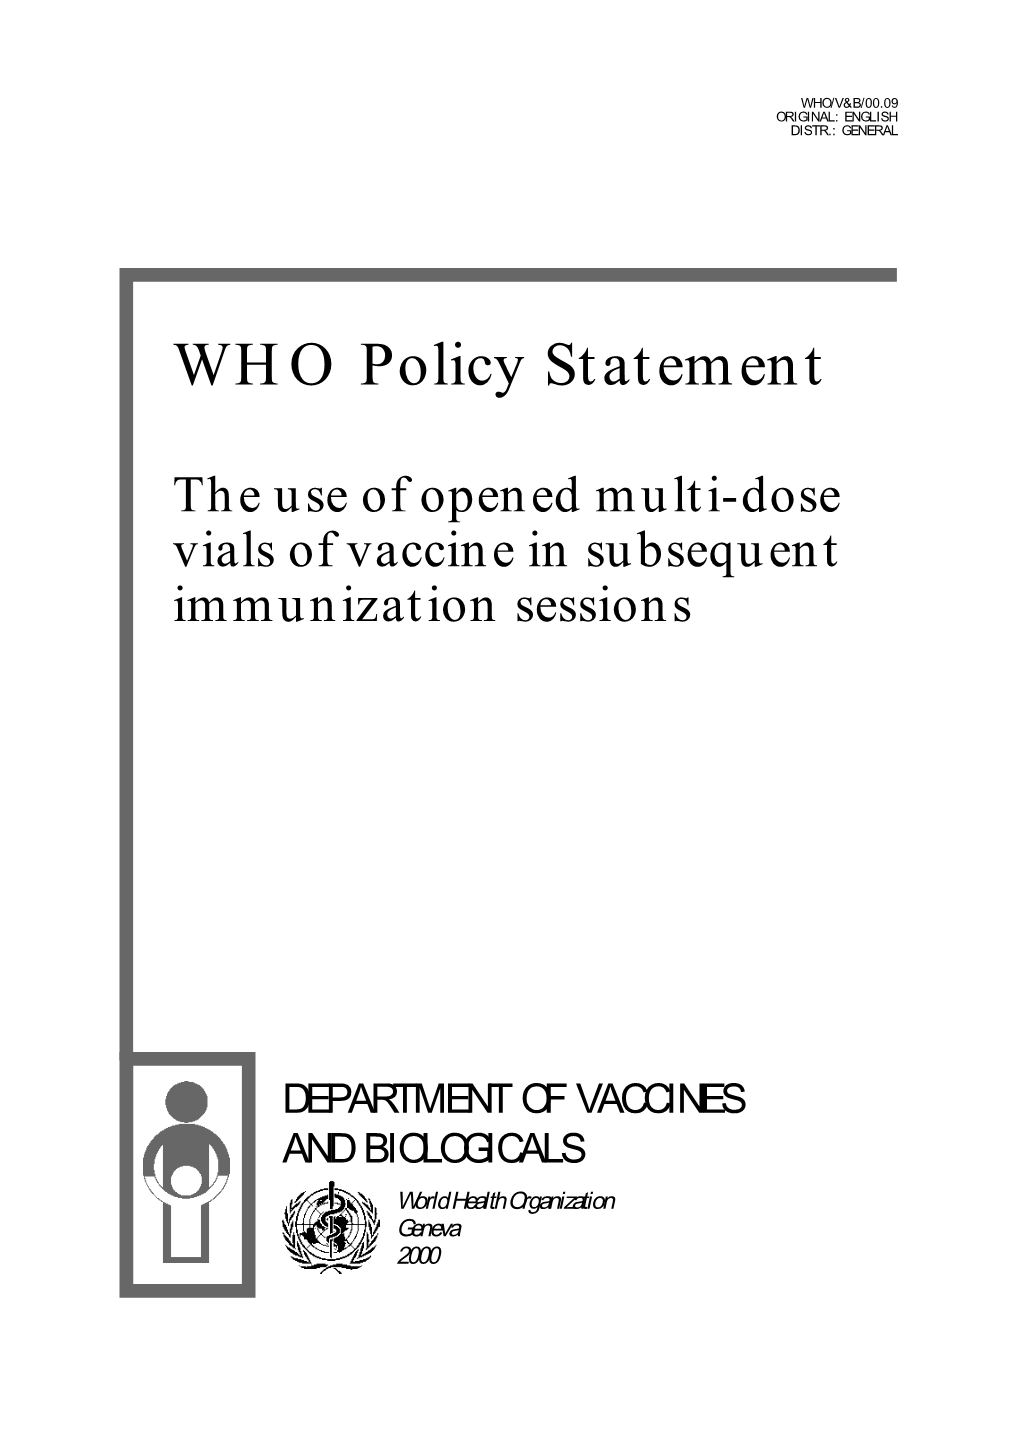 The Use of Opened Multi-Dose Vials of Vaccine in Subsequent Immunization Sessions